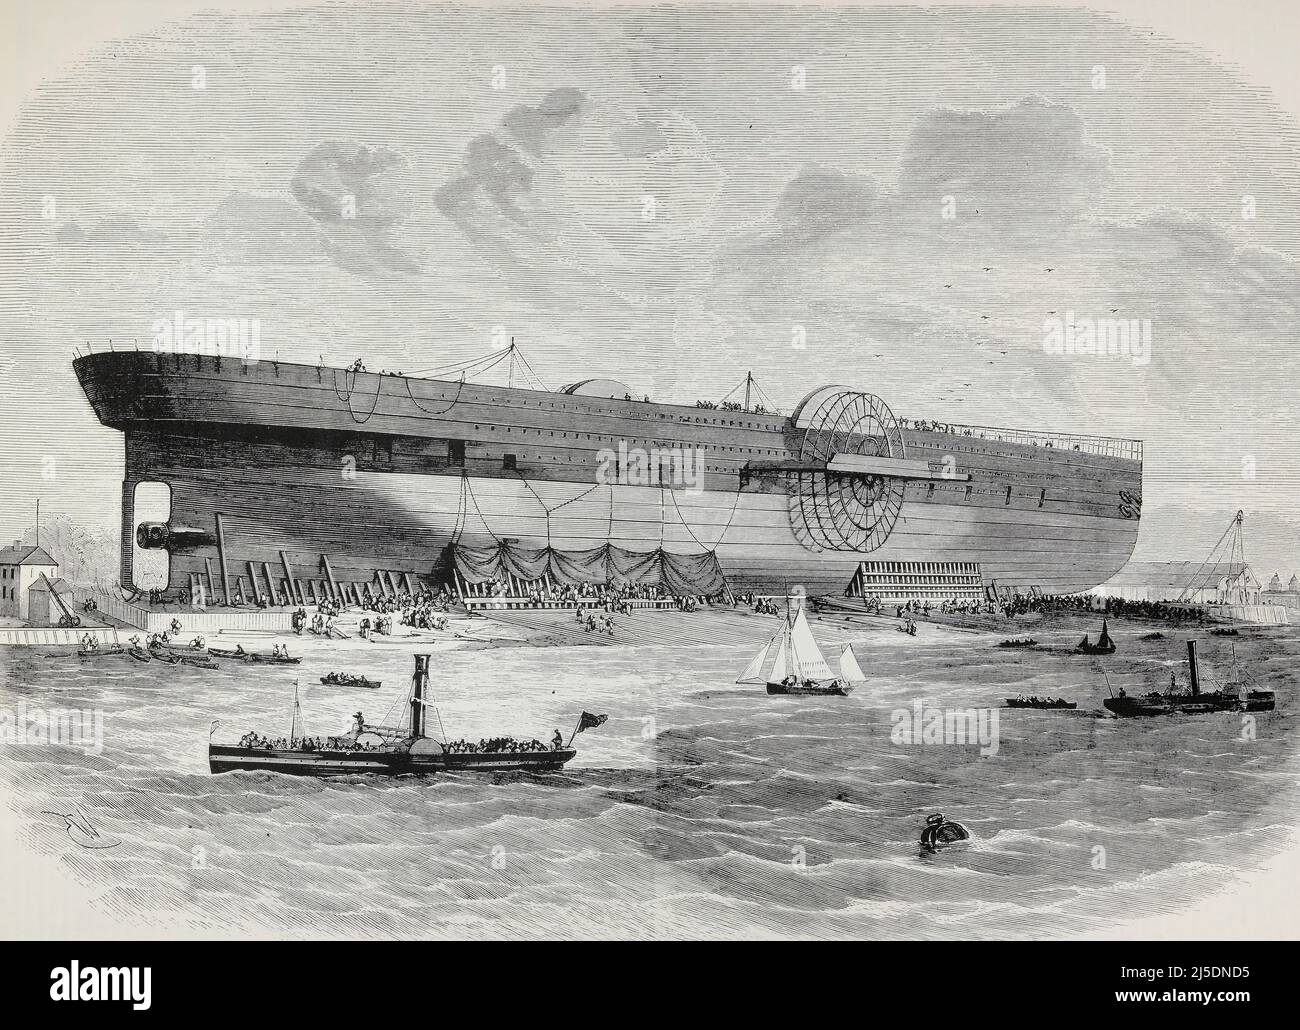 Eng translation : ' Preparations for the launch of the Leviathan (Great-Eastern), in London ' - Original in french : ' Préparatifs pour le lancement du Léviathan (Great-Eastern), à Londres ' - Extract from 'L'Illustration Journal Universel' - French illustrated magazine - 1857 Stock Photo